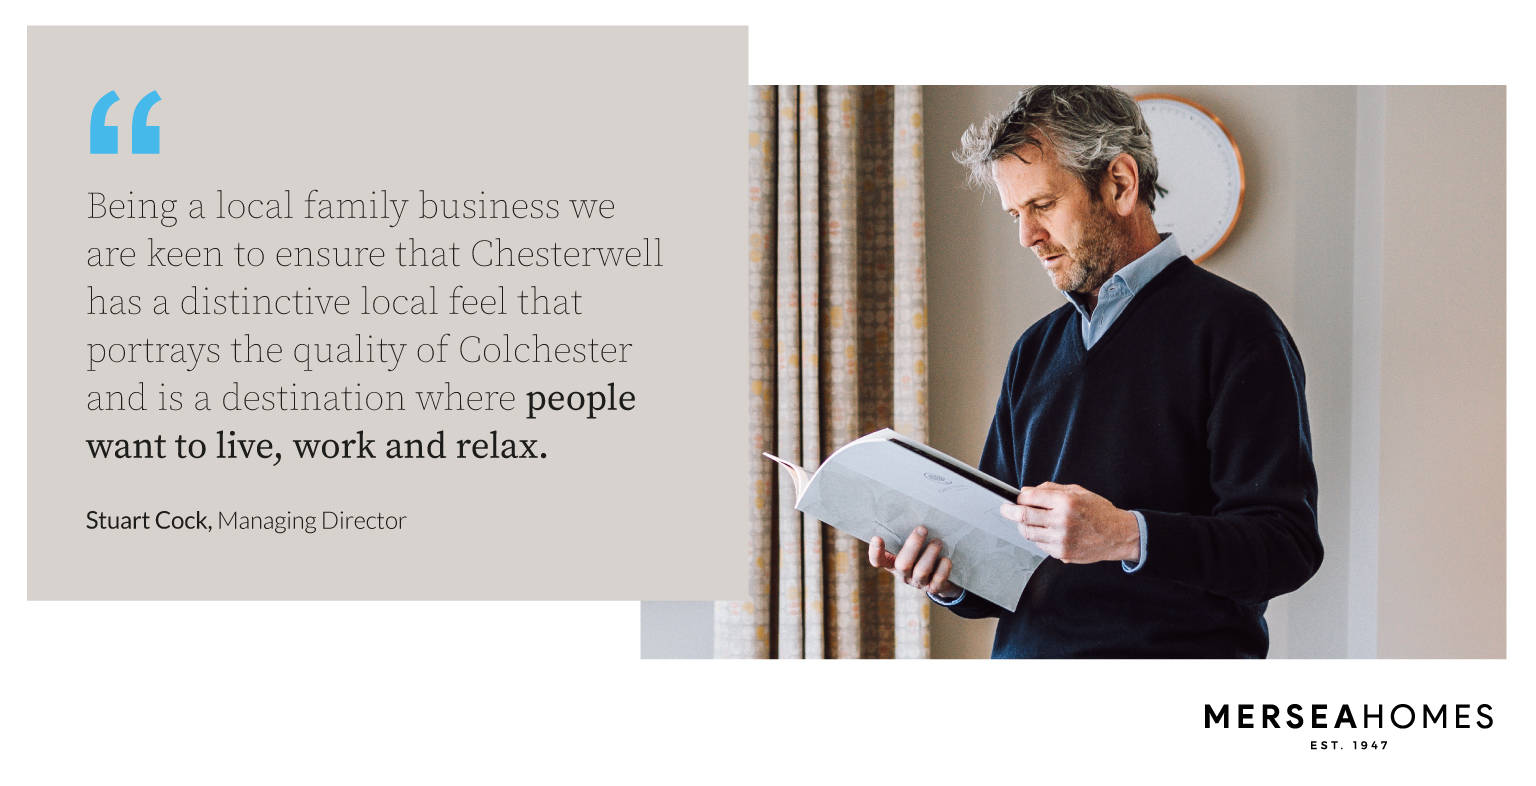 A quote from Stuart Cock, Mersea Homes MD about Chesterwell